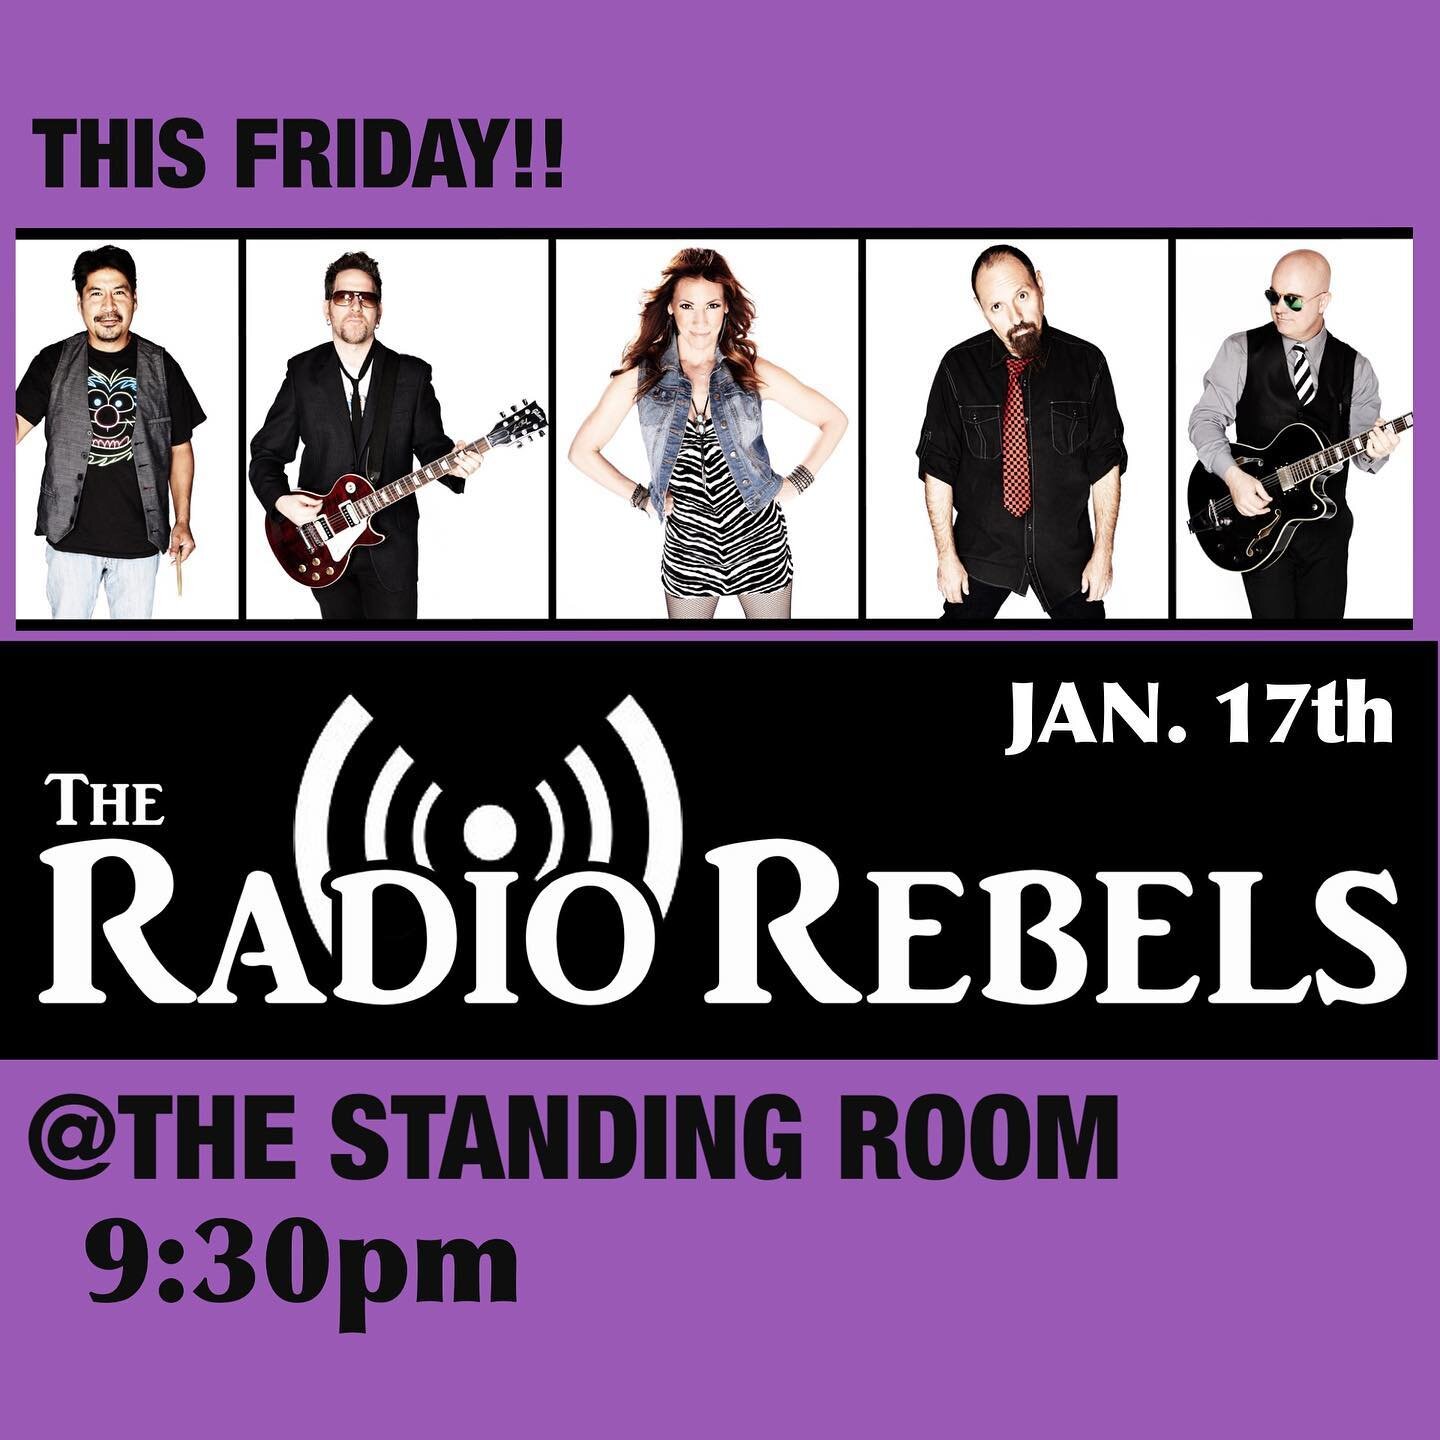 That&rsquo;s right!! Getting local at The Standing Room!  Your favorite 80s/90s all night!! No cover!  #livemusic #hermosabeach #theradiorebelsband #rebelmusicentertainment #80sand90s #celebrate #danceband #coolcoverband #southbaylocals #thestandingr